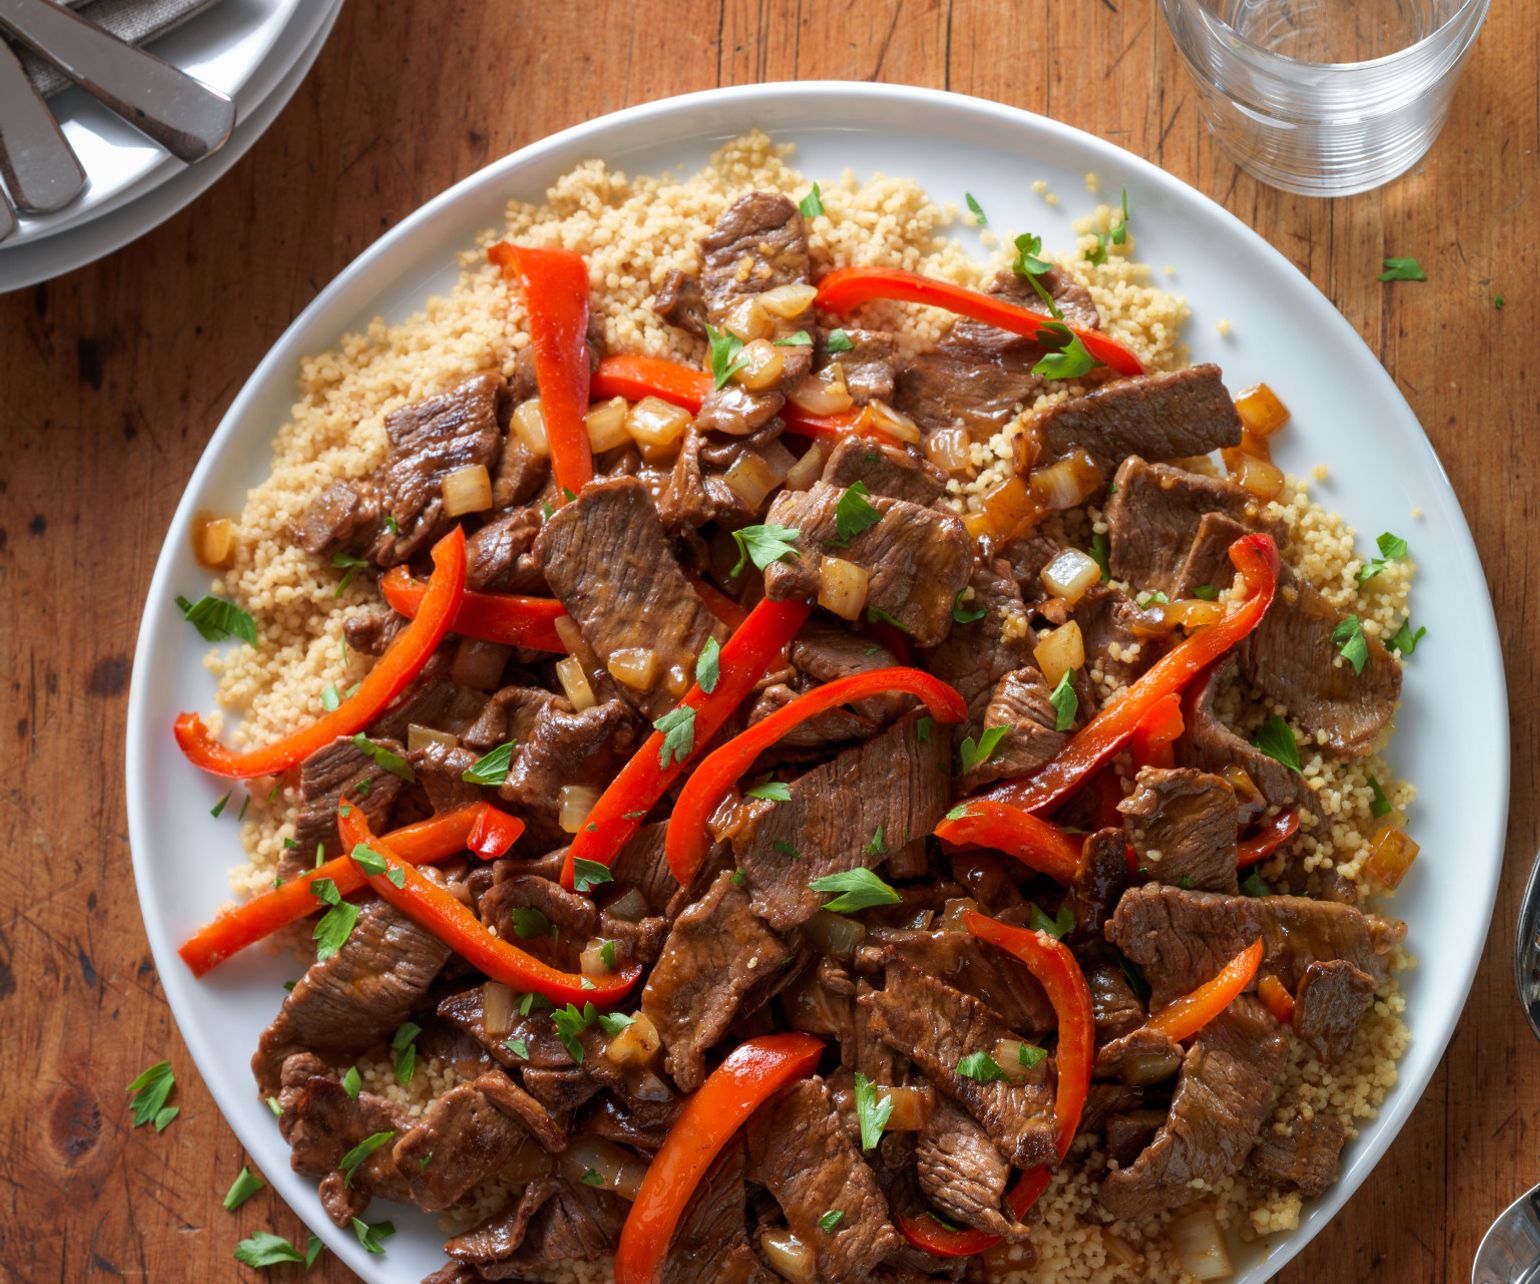 Beef Stir-Fry with Couscous